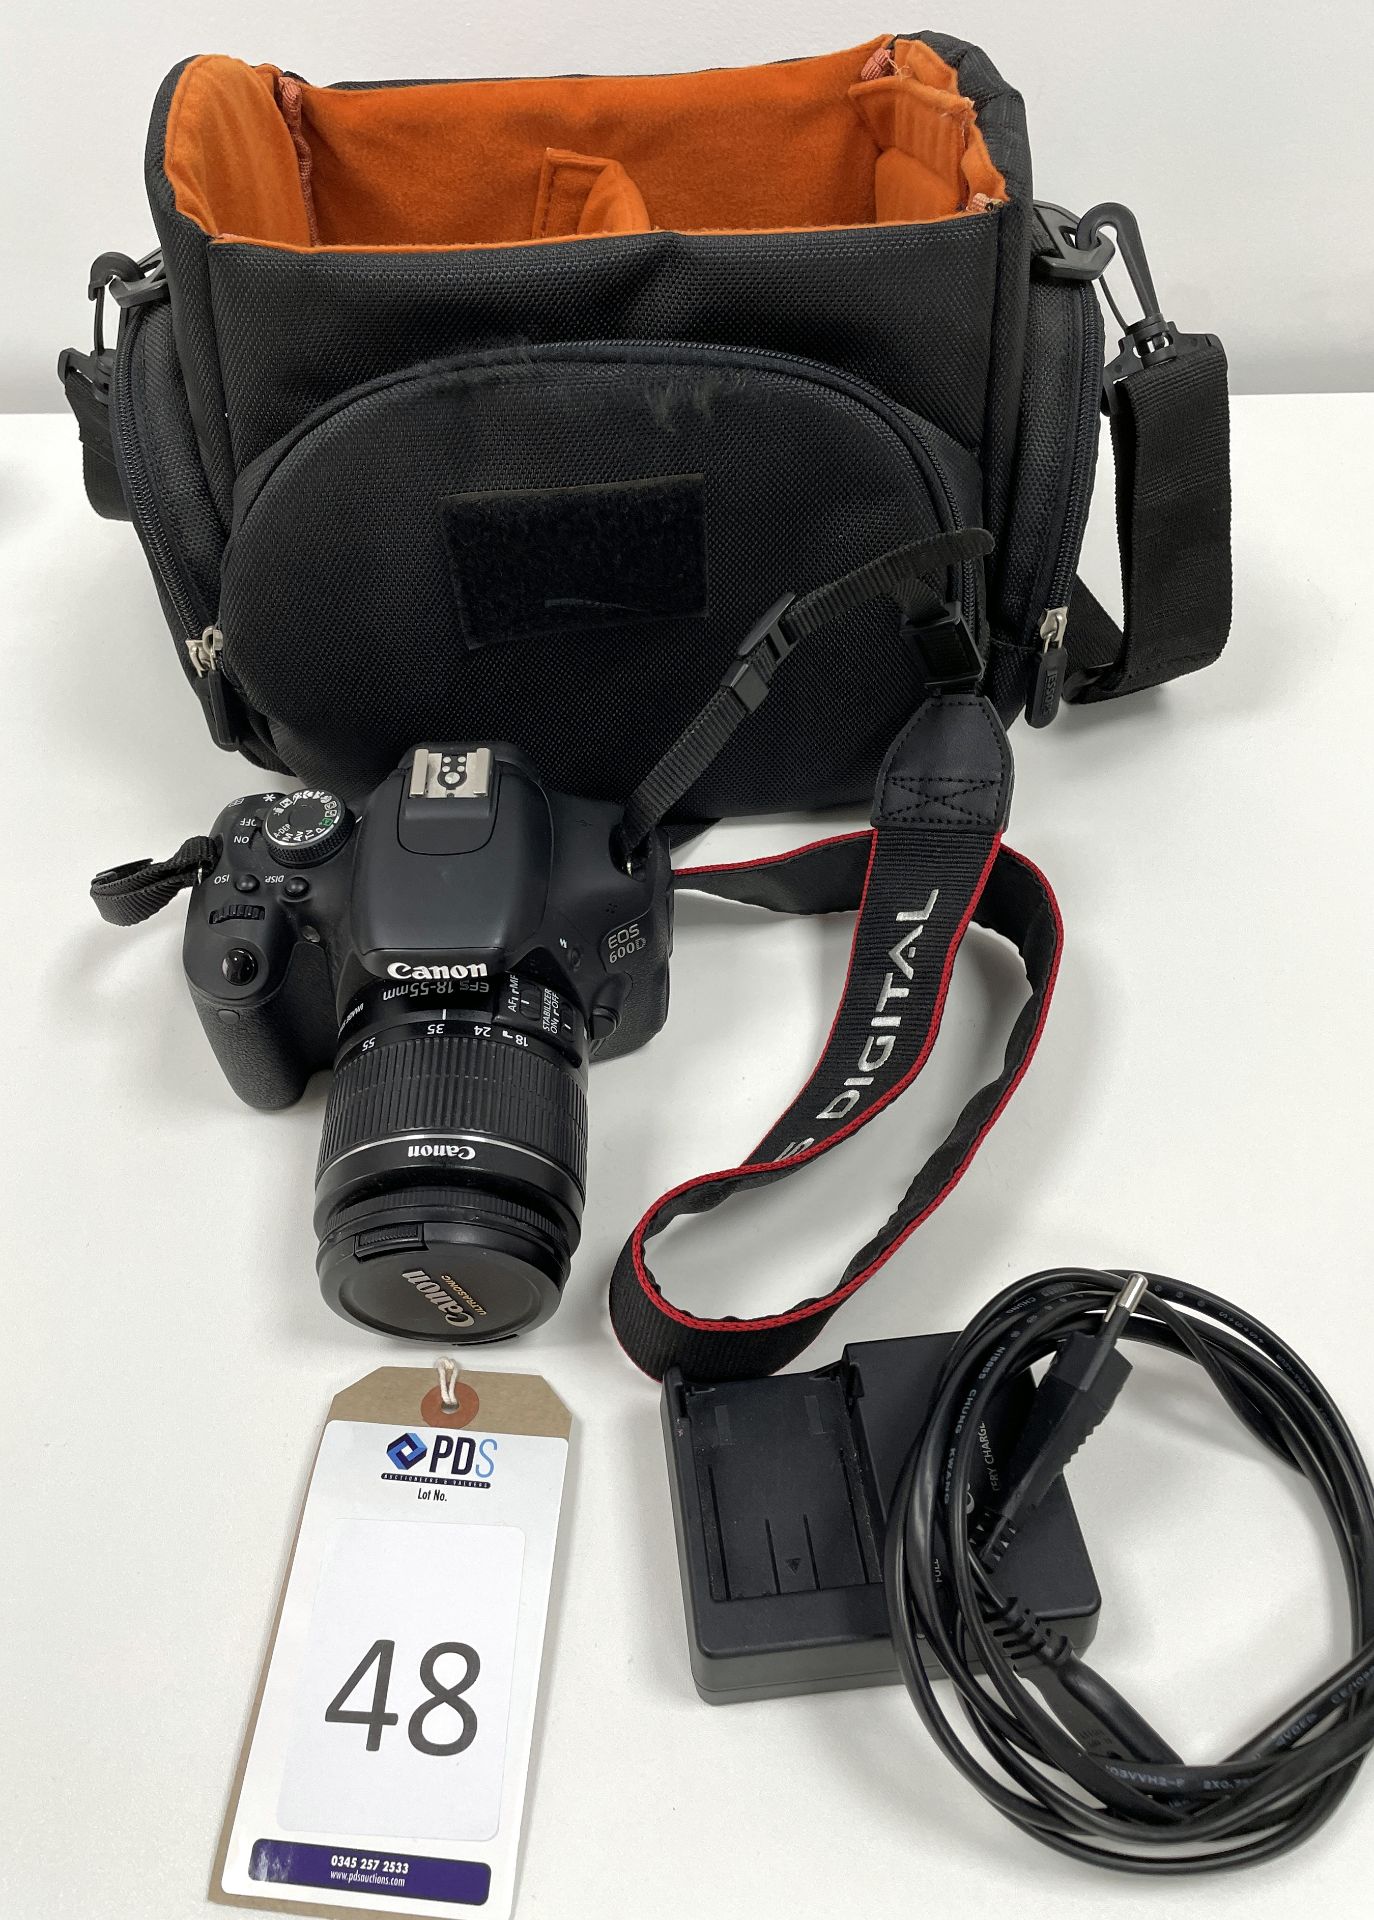 Canon EOS 600D Digital Camera (Location: Westminster. Please Refer to General Notes)